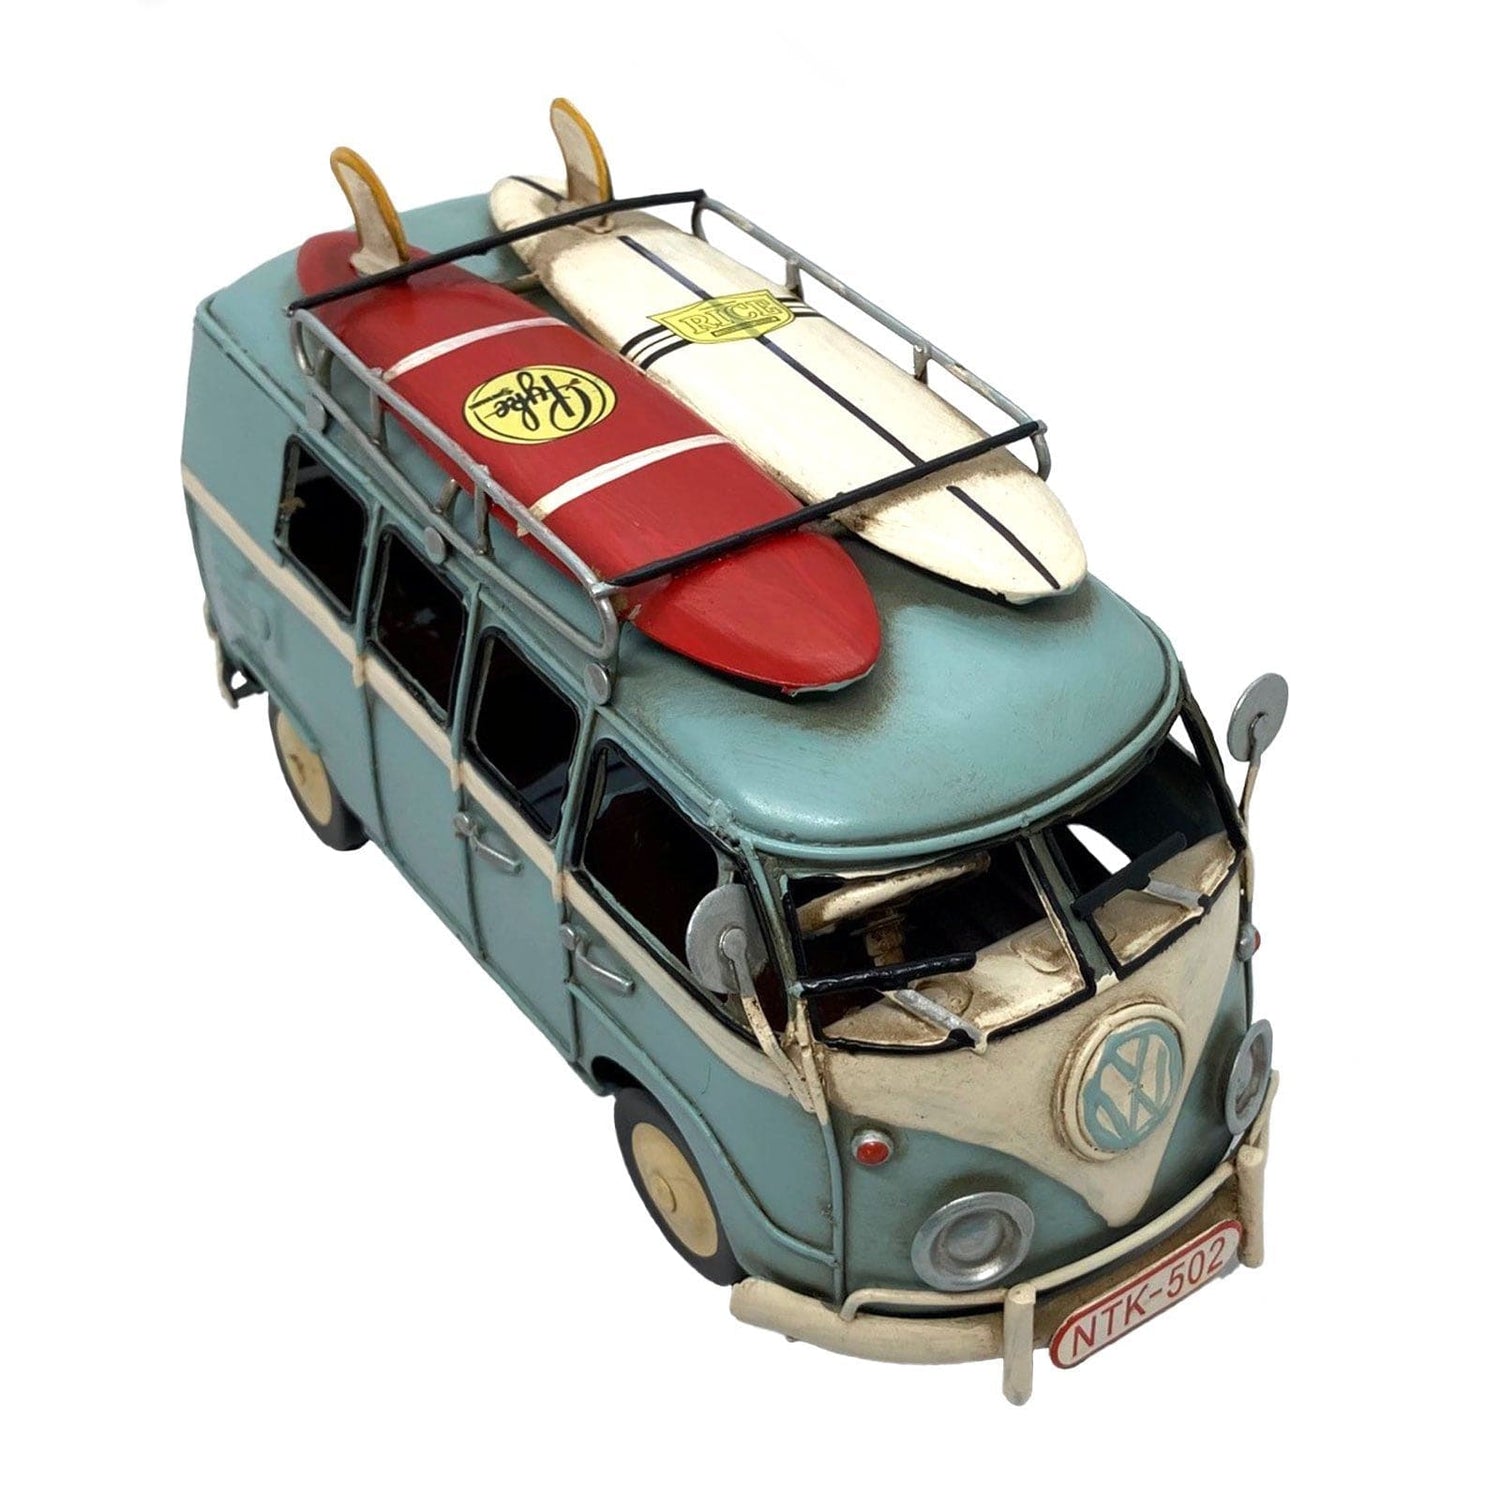 Blue VW Kombi with Surfboards